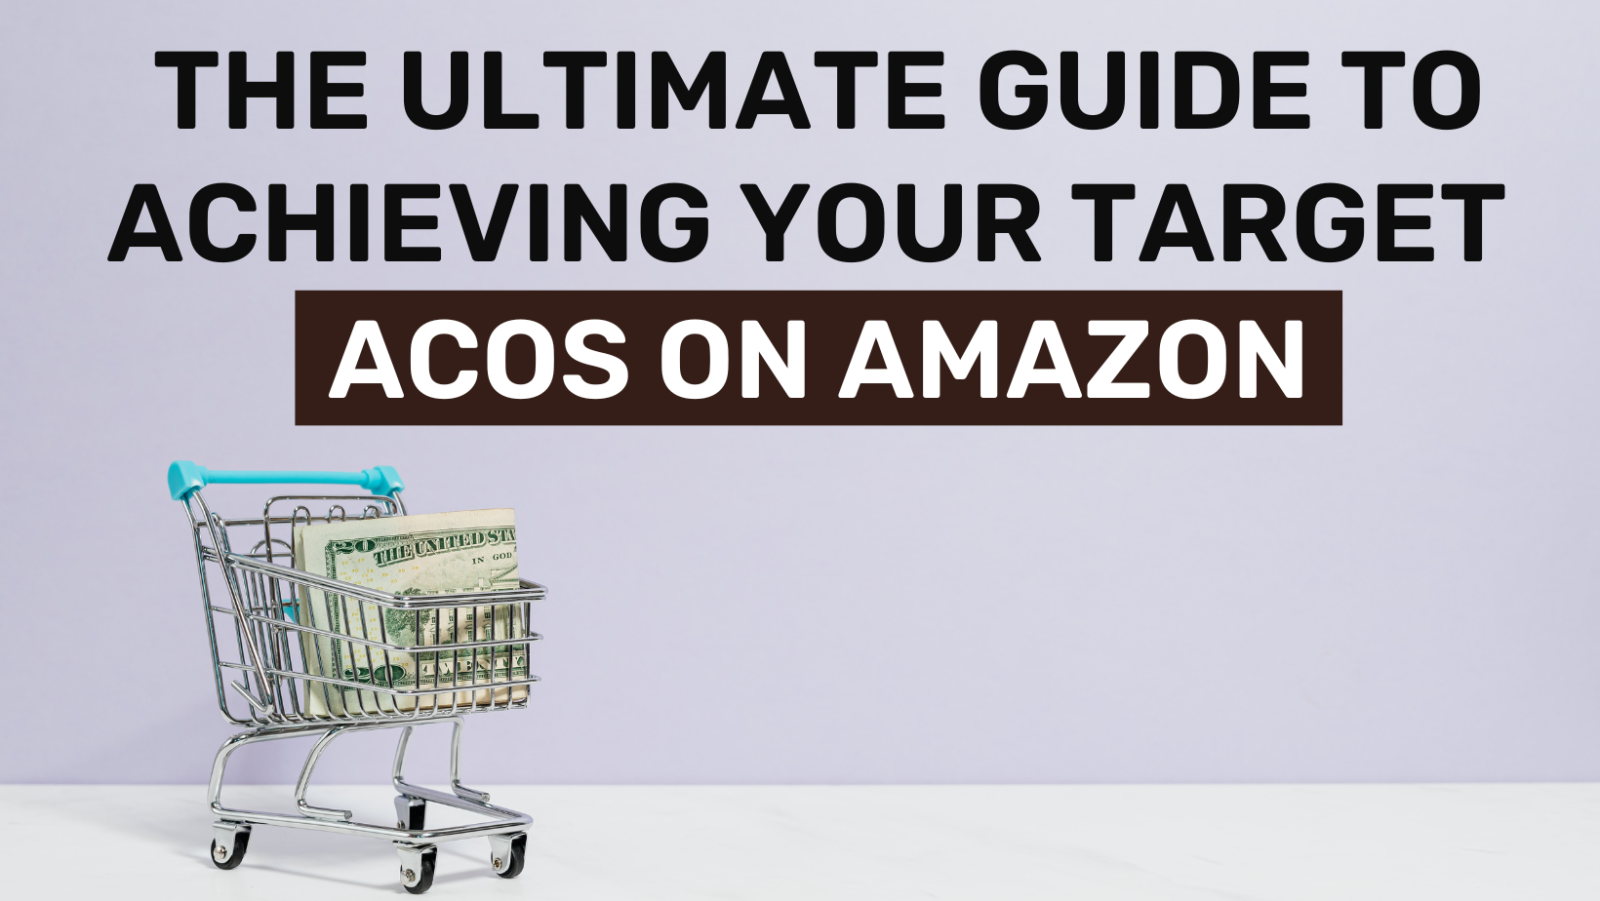 The Ultimate Guide to Achieving Your Target ACoS on Amazon